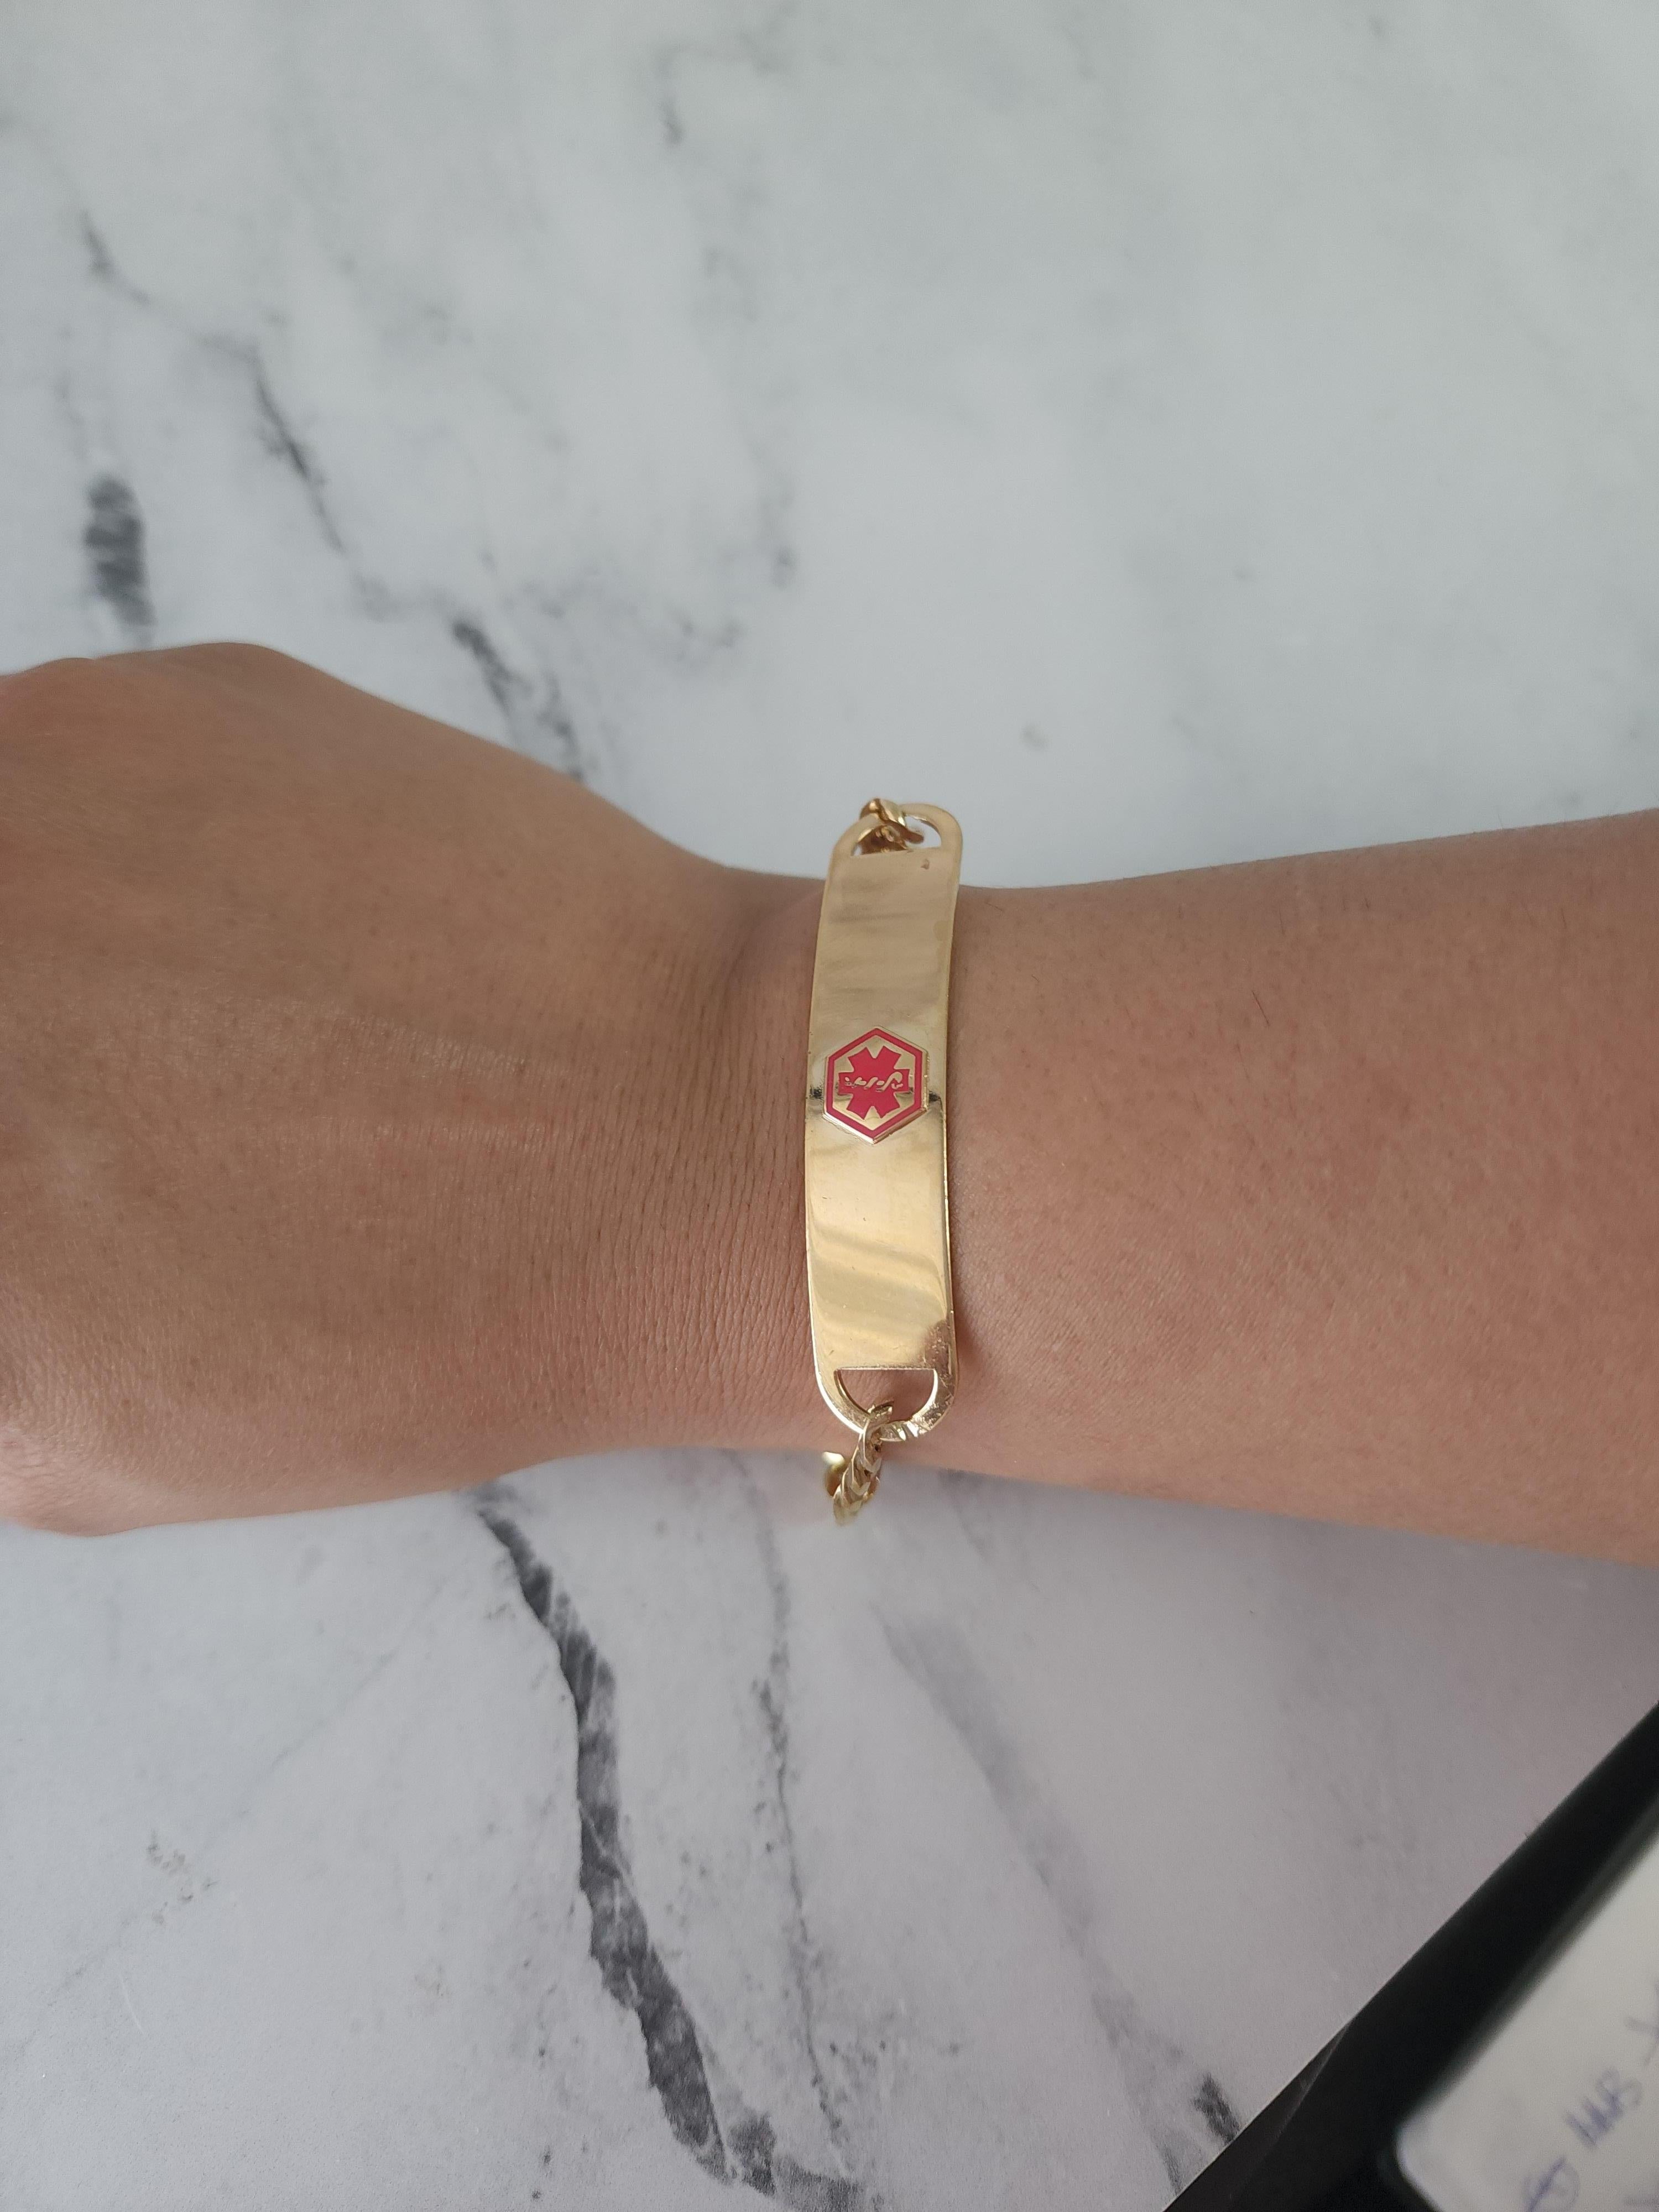 ♥ Product Summary ♥

Details: Medical Alert Bracelet with Figaro Chain 
Metal: 14k Yellow Gold 
Weight: 21 grams 
Length: 7 inches
Dimensions: 13mm x 58mm
**Engraving: $35 for 1 line $65 for 2 or more lines (Engraved items are final sale) 
